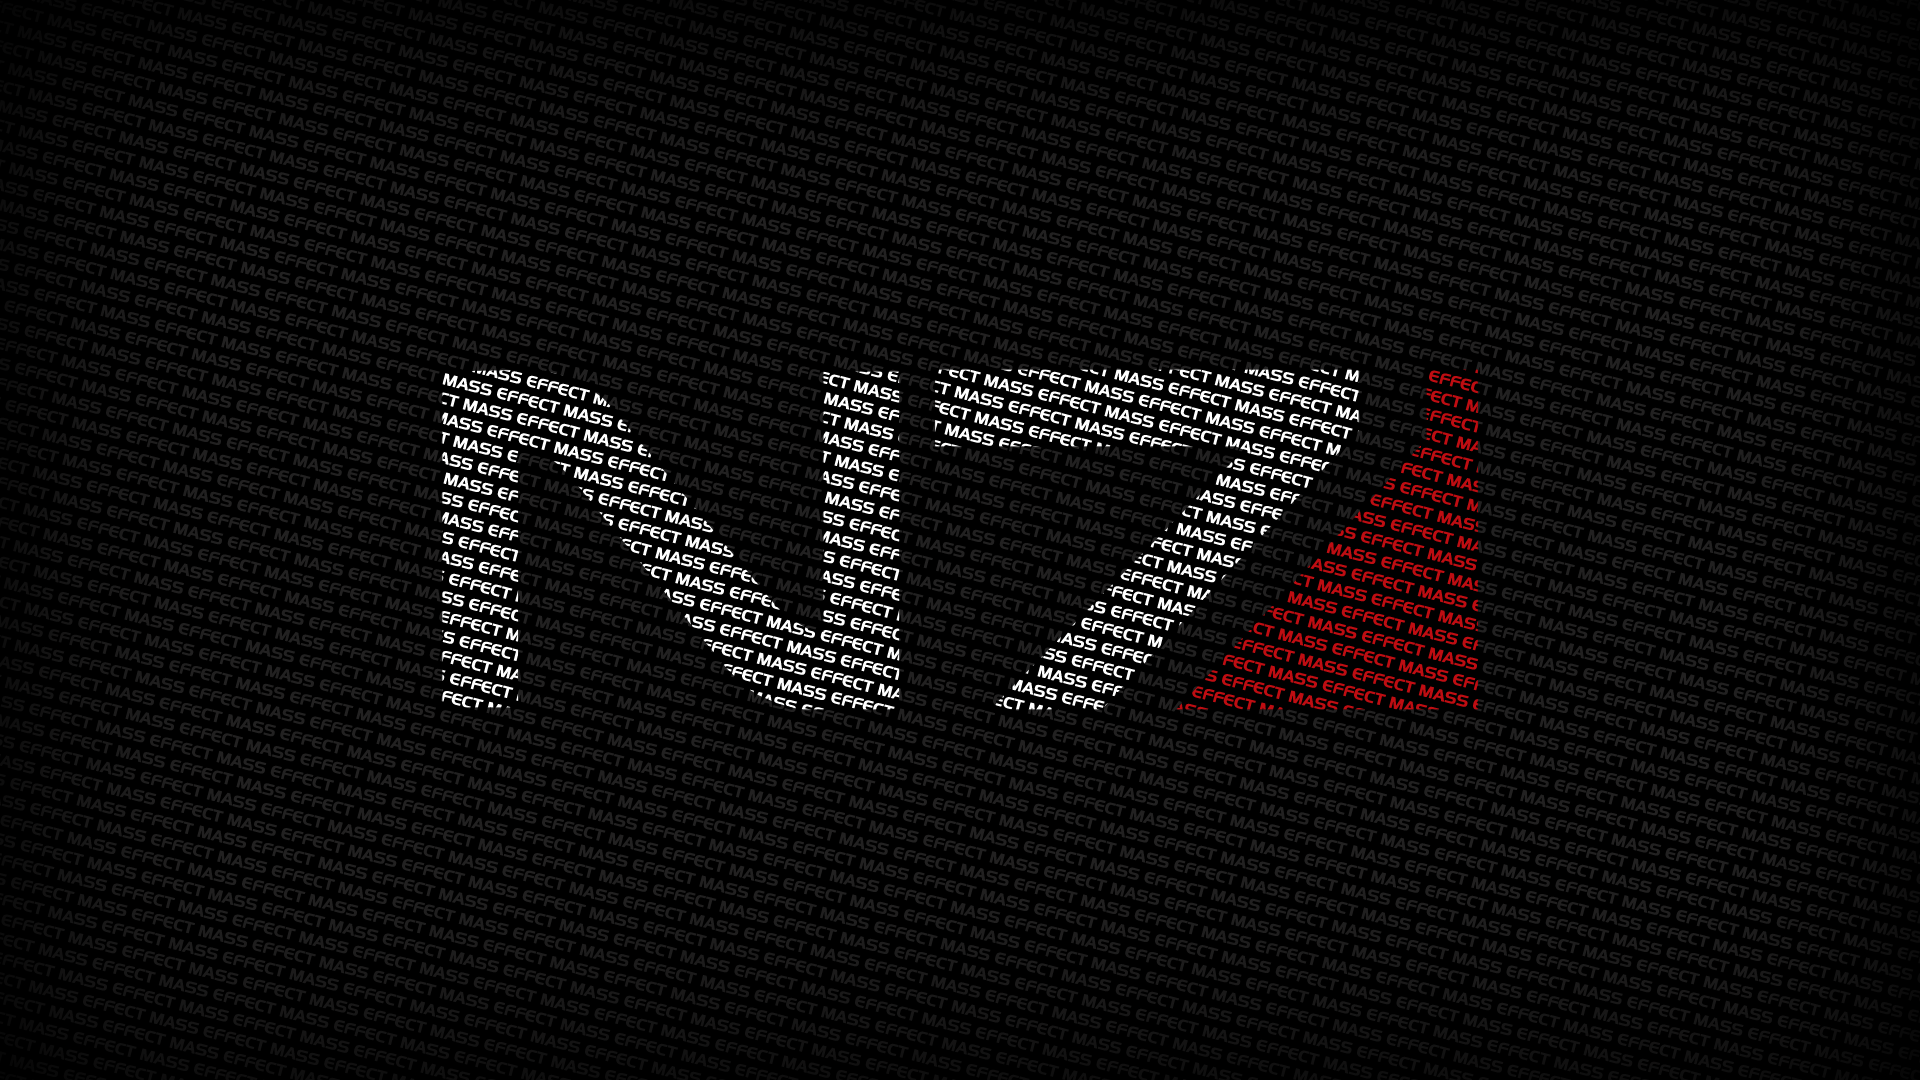 General 1920x1080 Mass Effect N7 video games logo science fiction PC gaming video game art